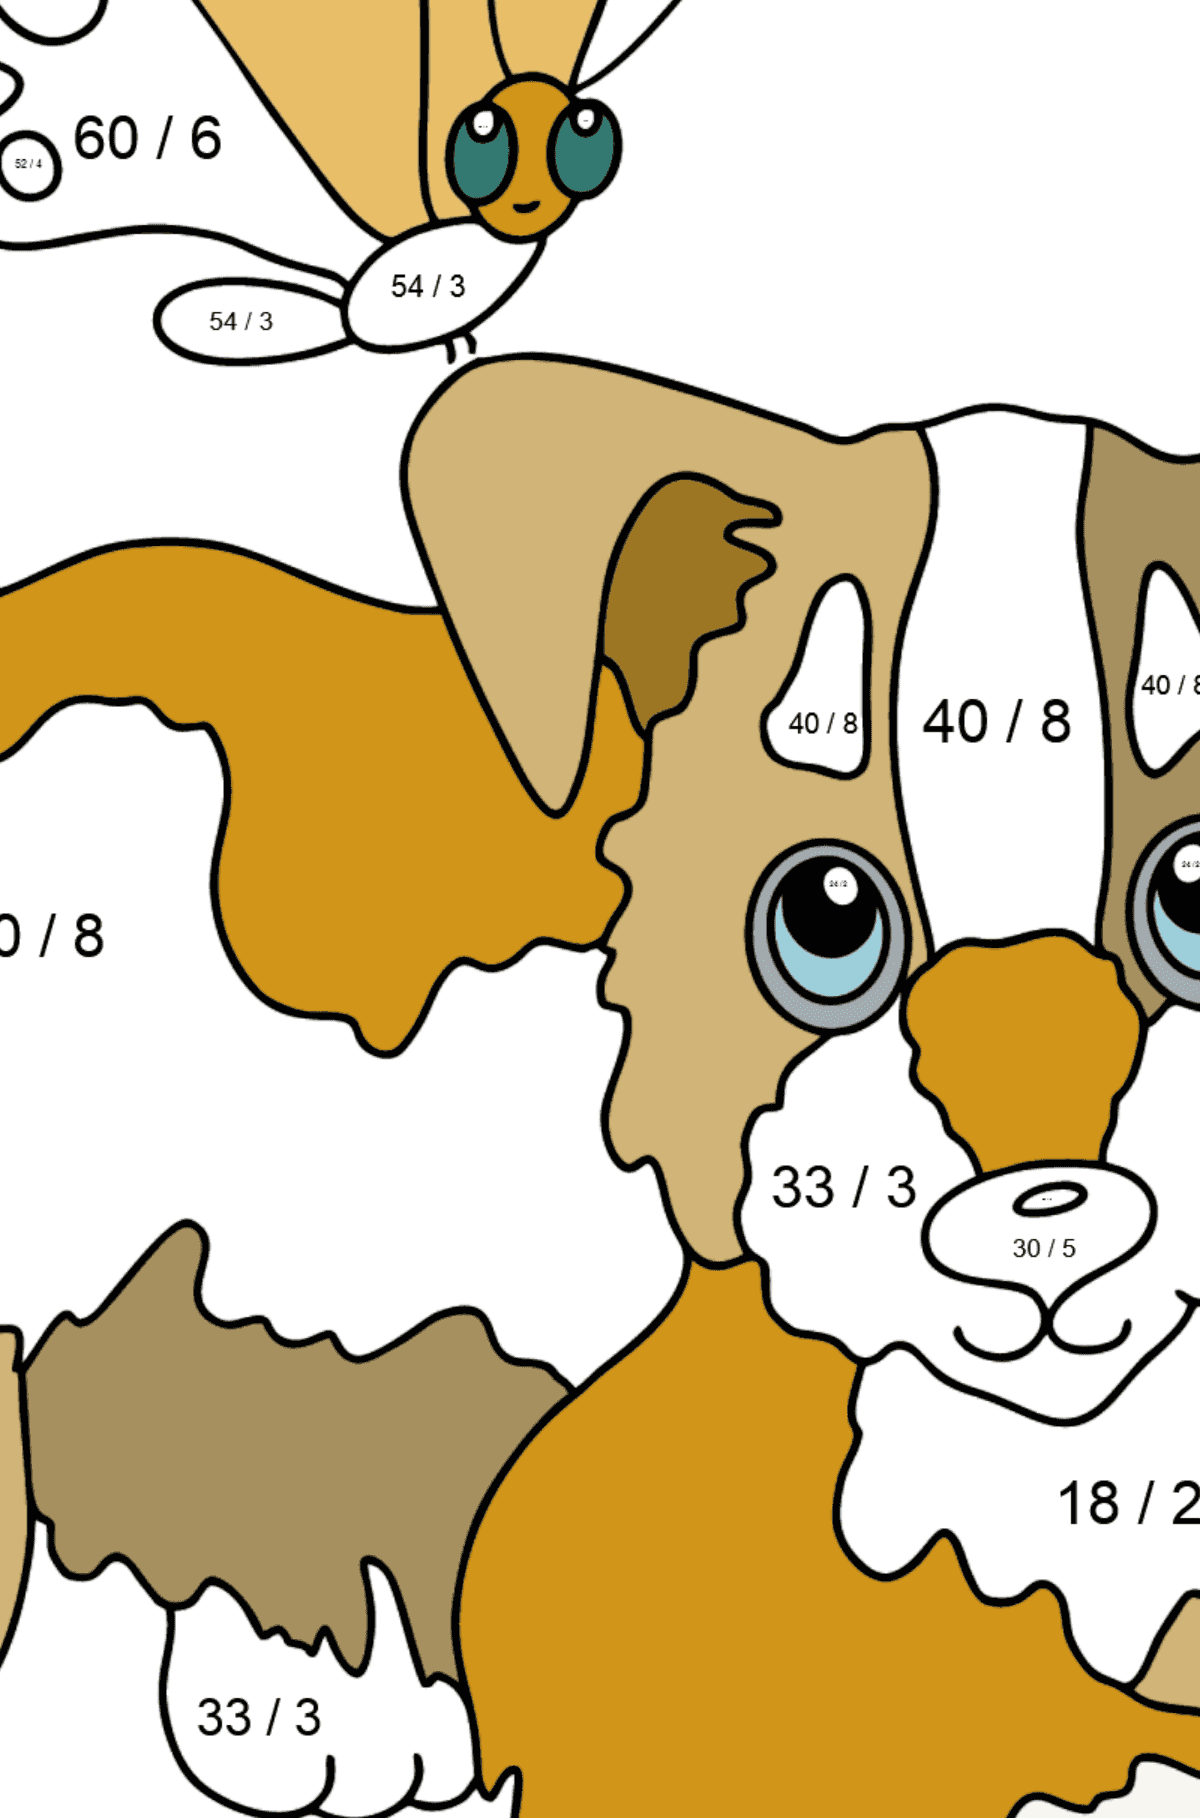 Coloring Page - A Dog is Playing with a Butterfly - Math Coloring - Division for Kids